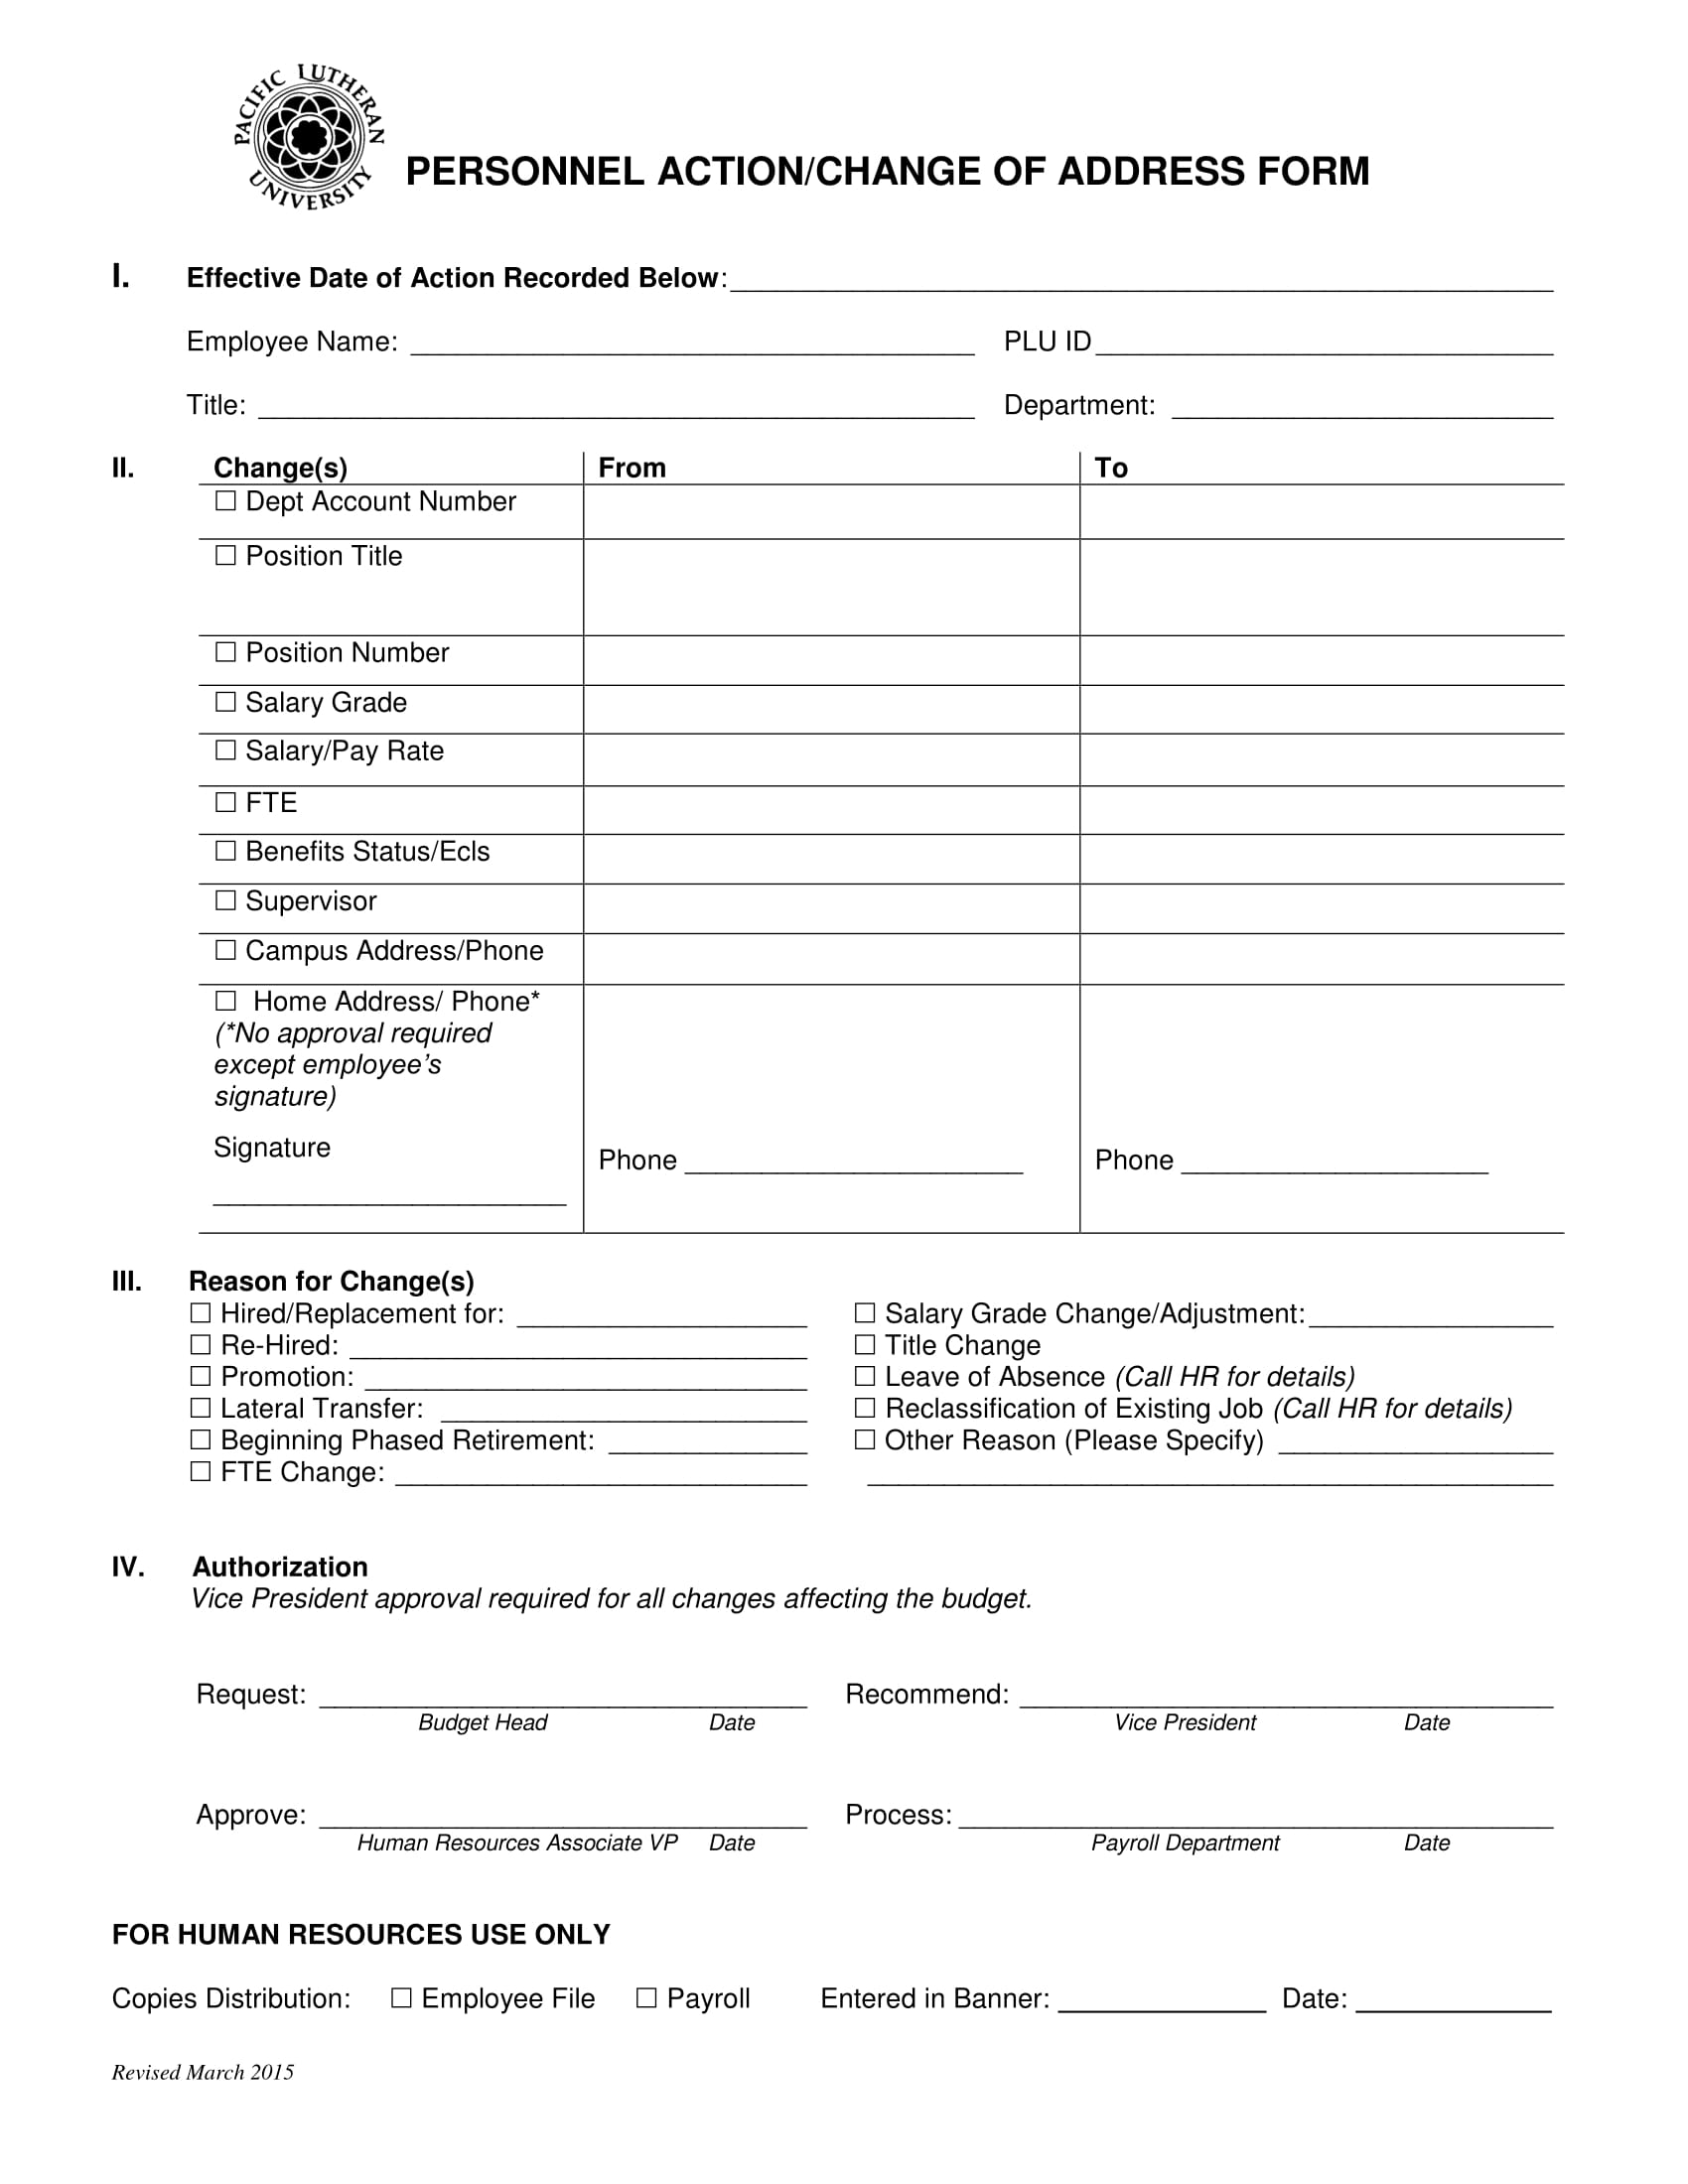 personnel action change of address form 1